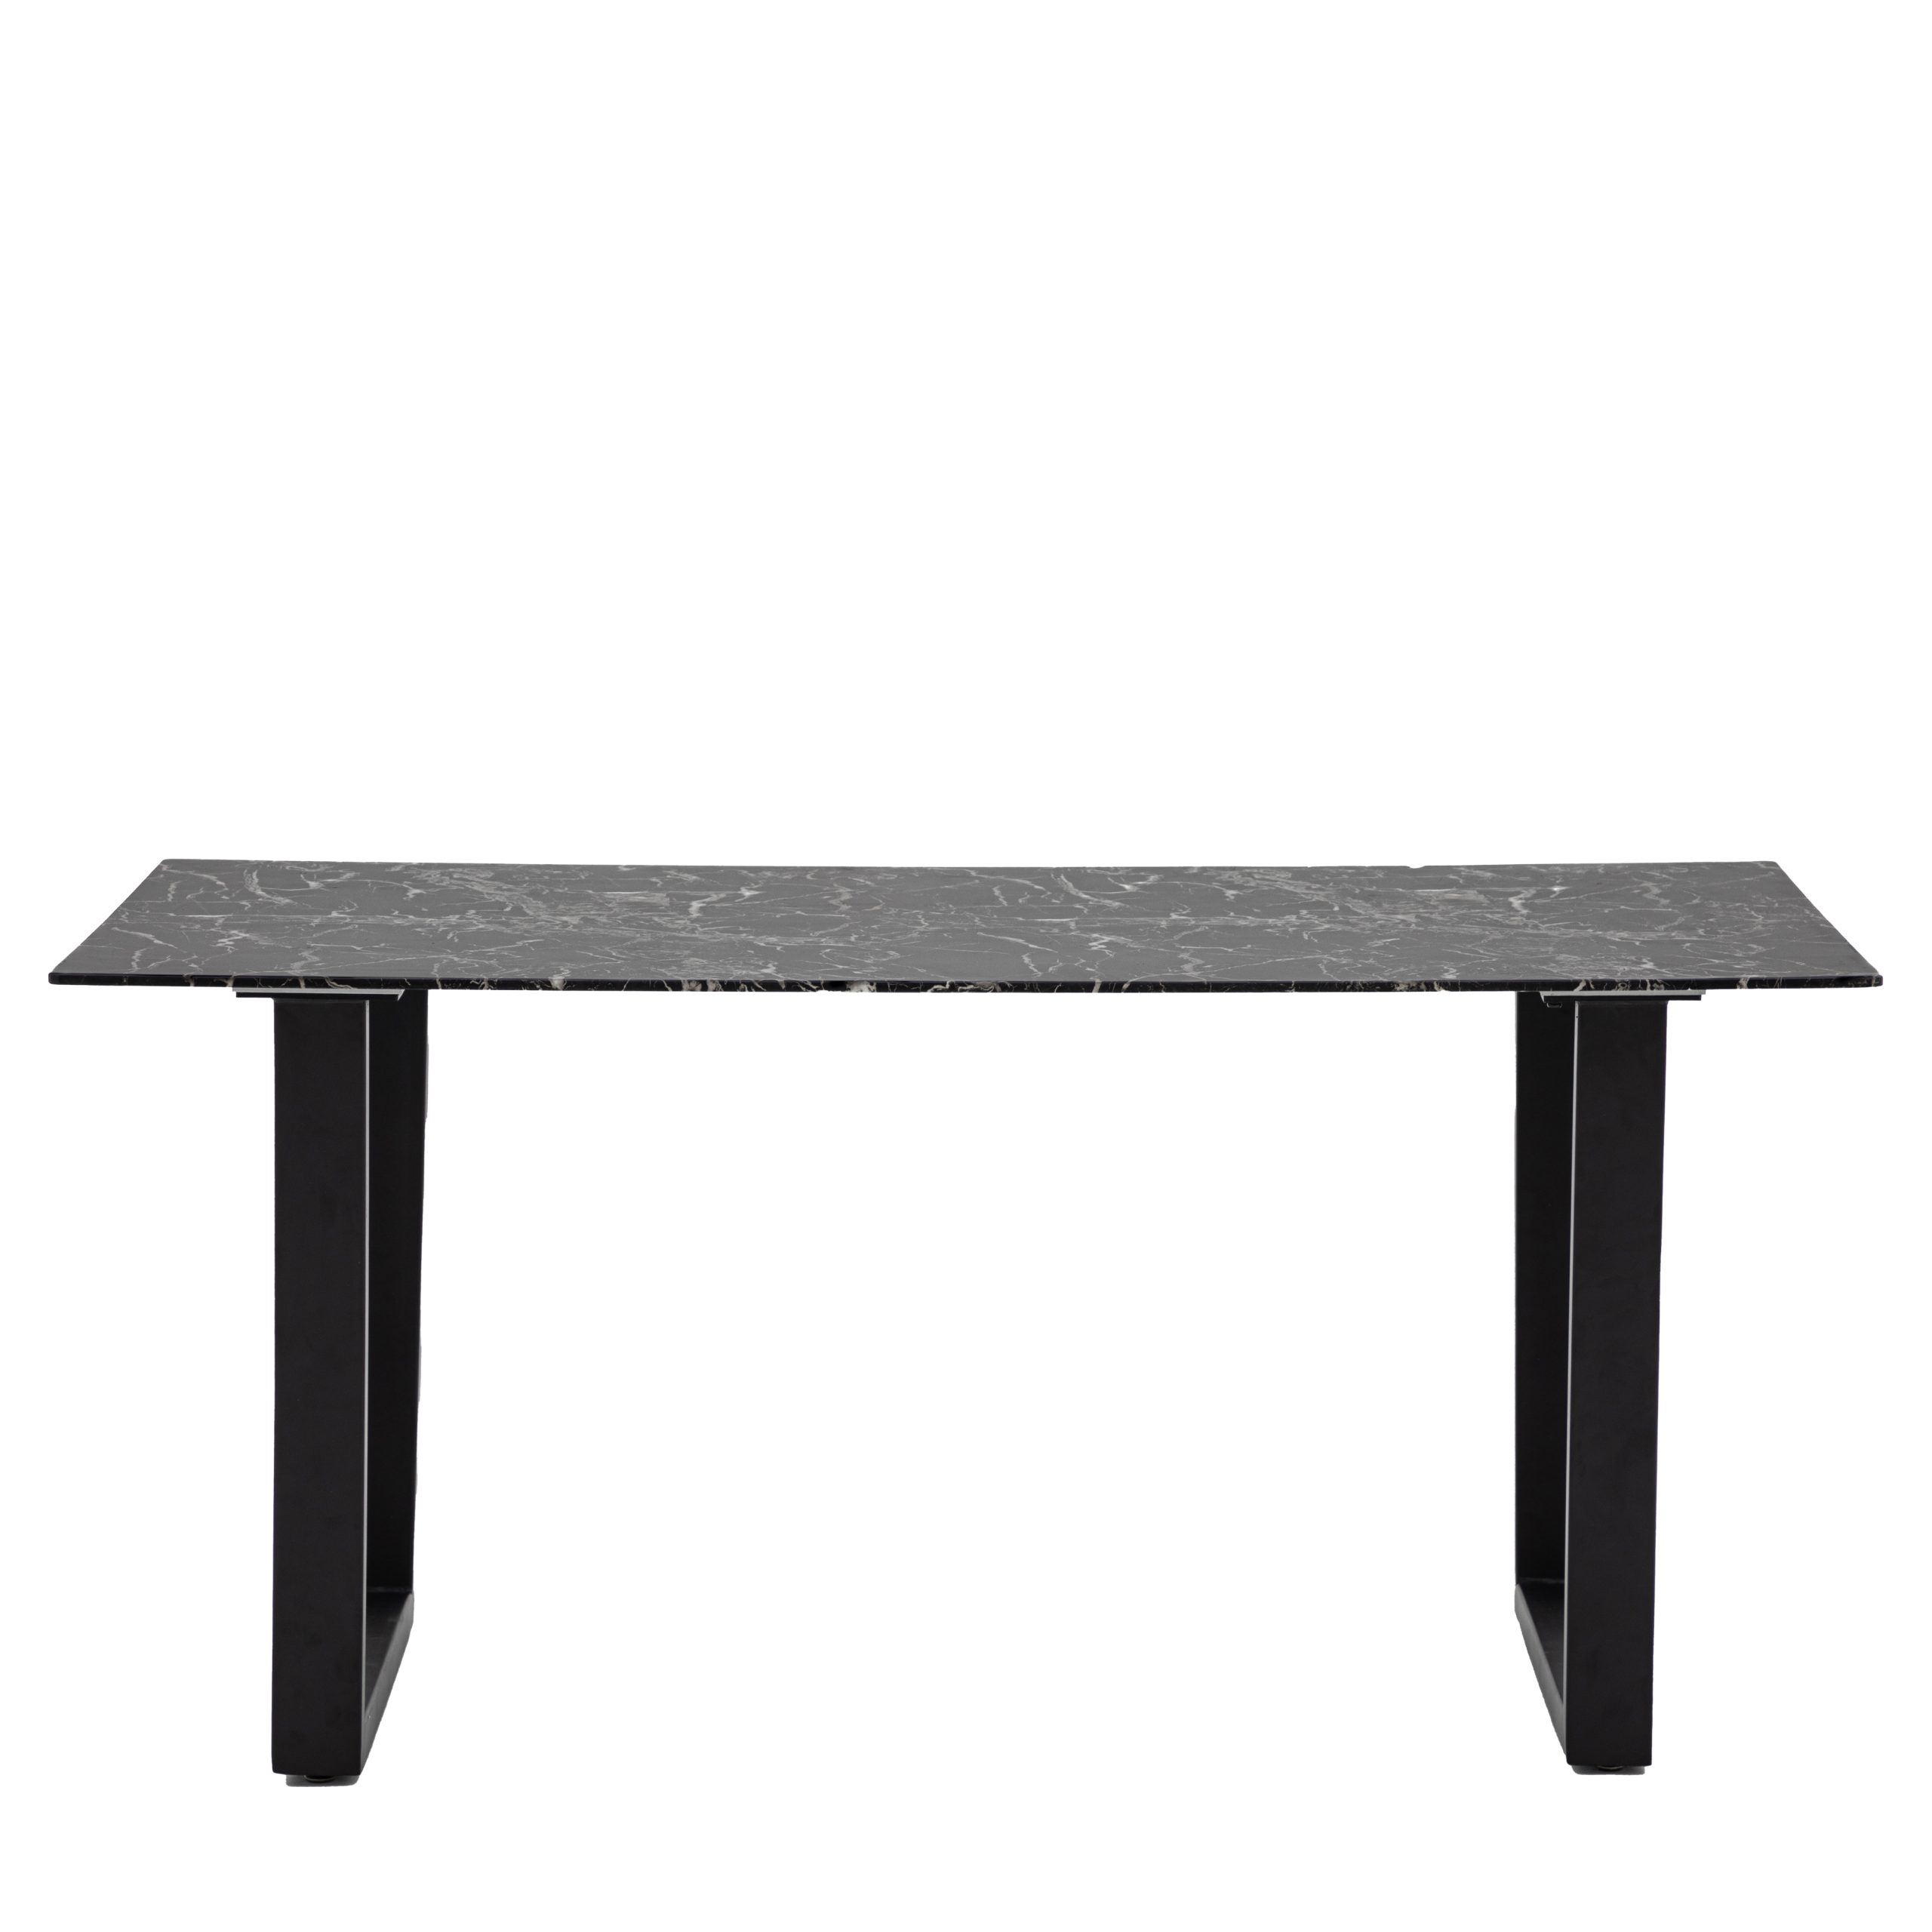 Gallery Direct Davidson Dining Table Black Effect